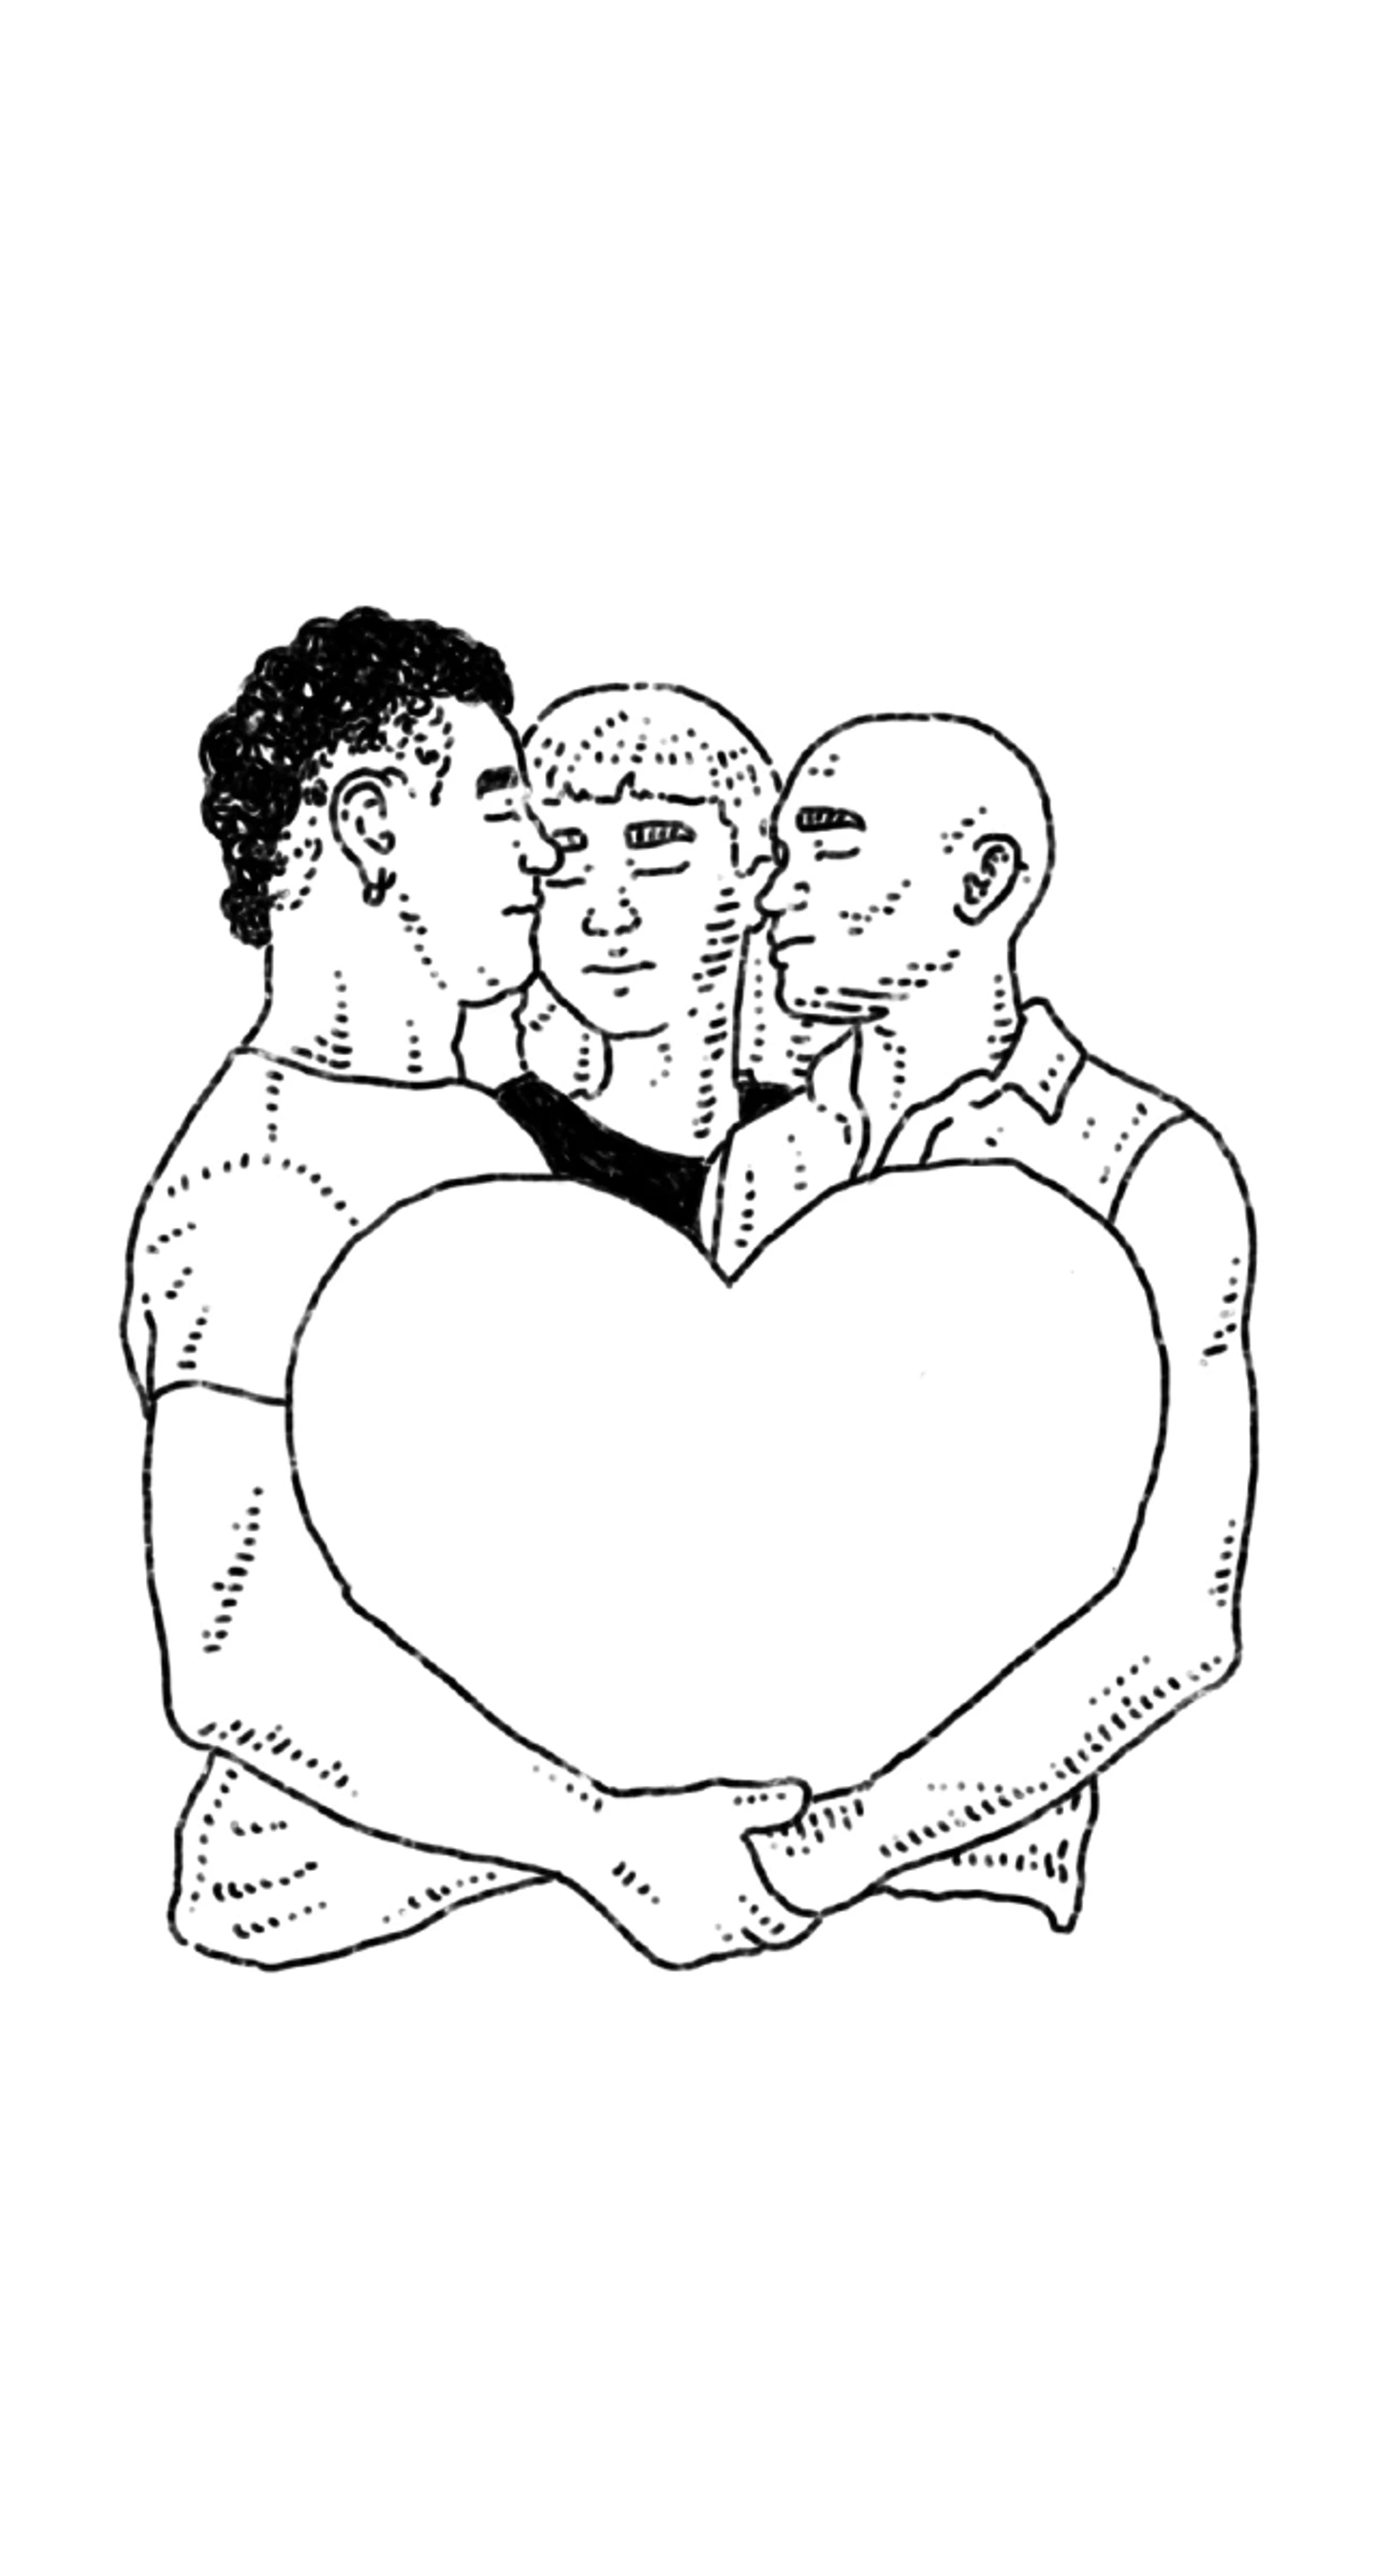 Three people hugging together while two of them hold a heart.